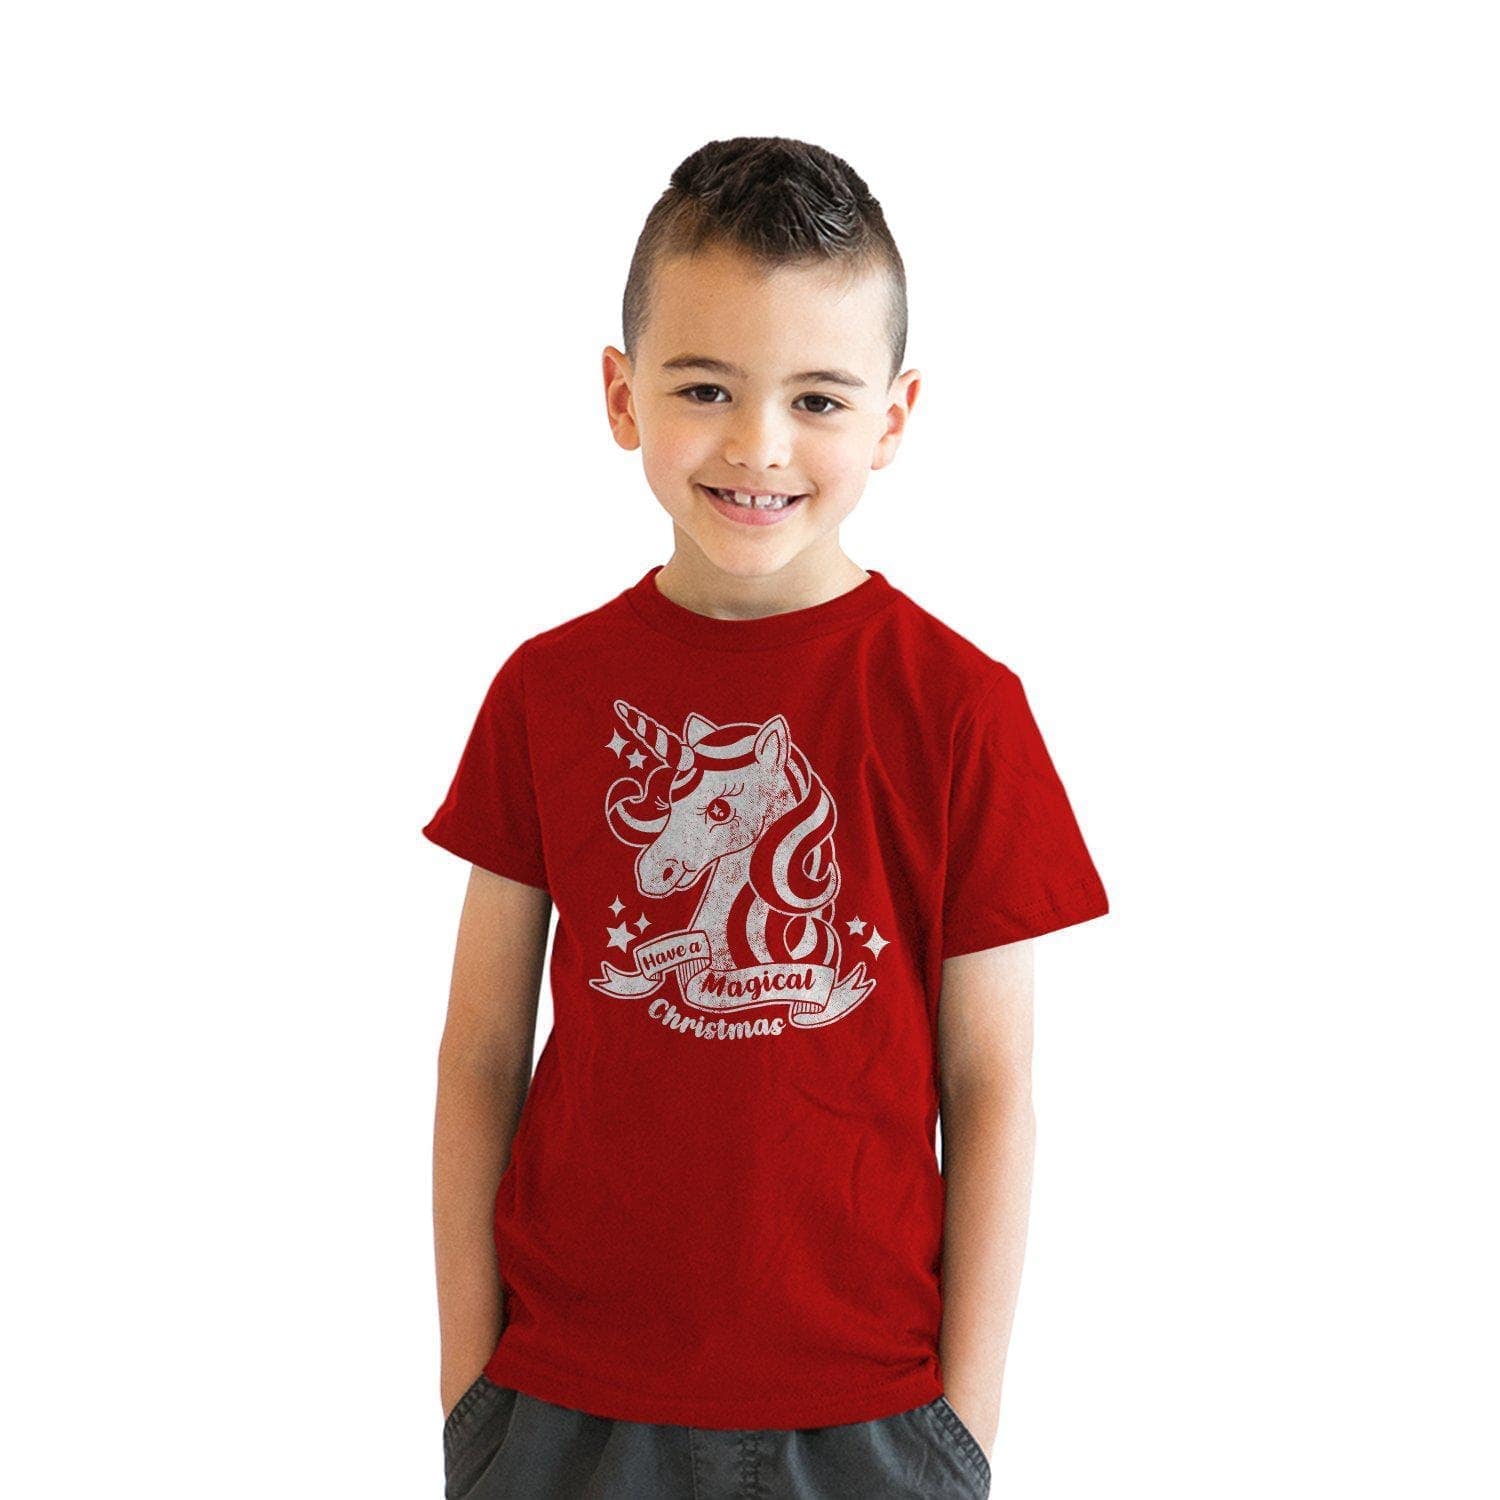 Have A Magical Christmas Youth Tshirt - Crazy Dog T-Shirts